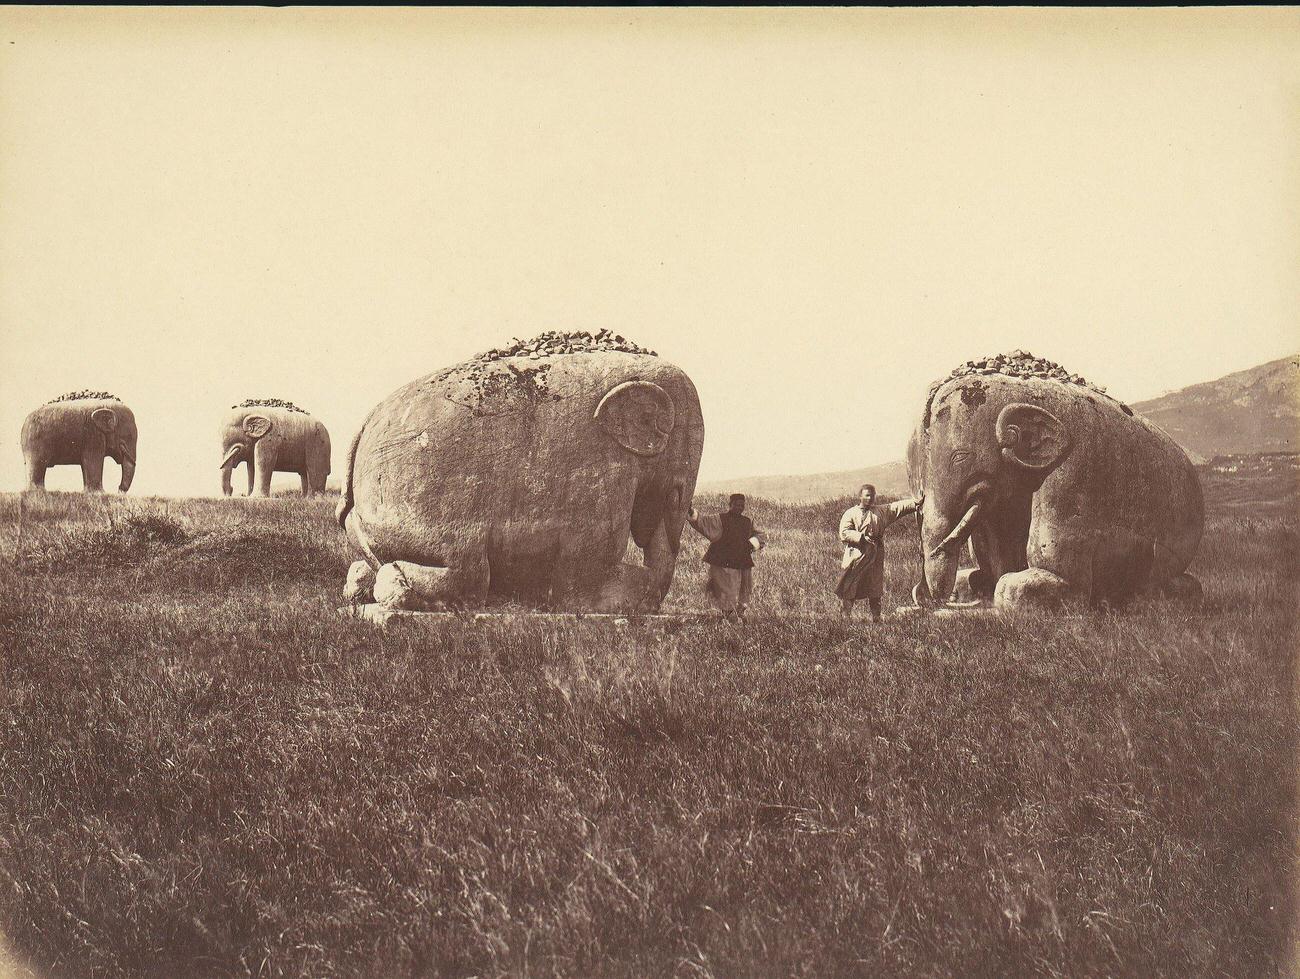 Two Men by Monumental Elephant Statues, China, 1860s